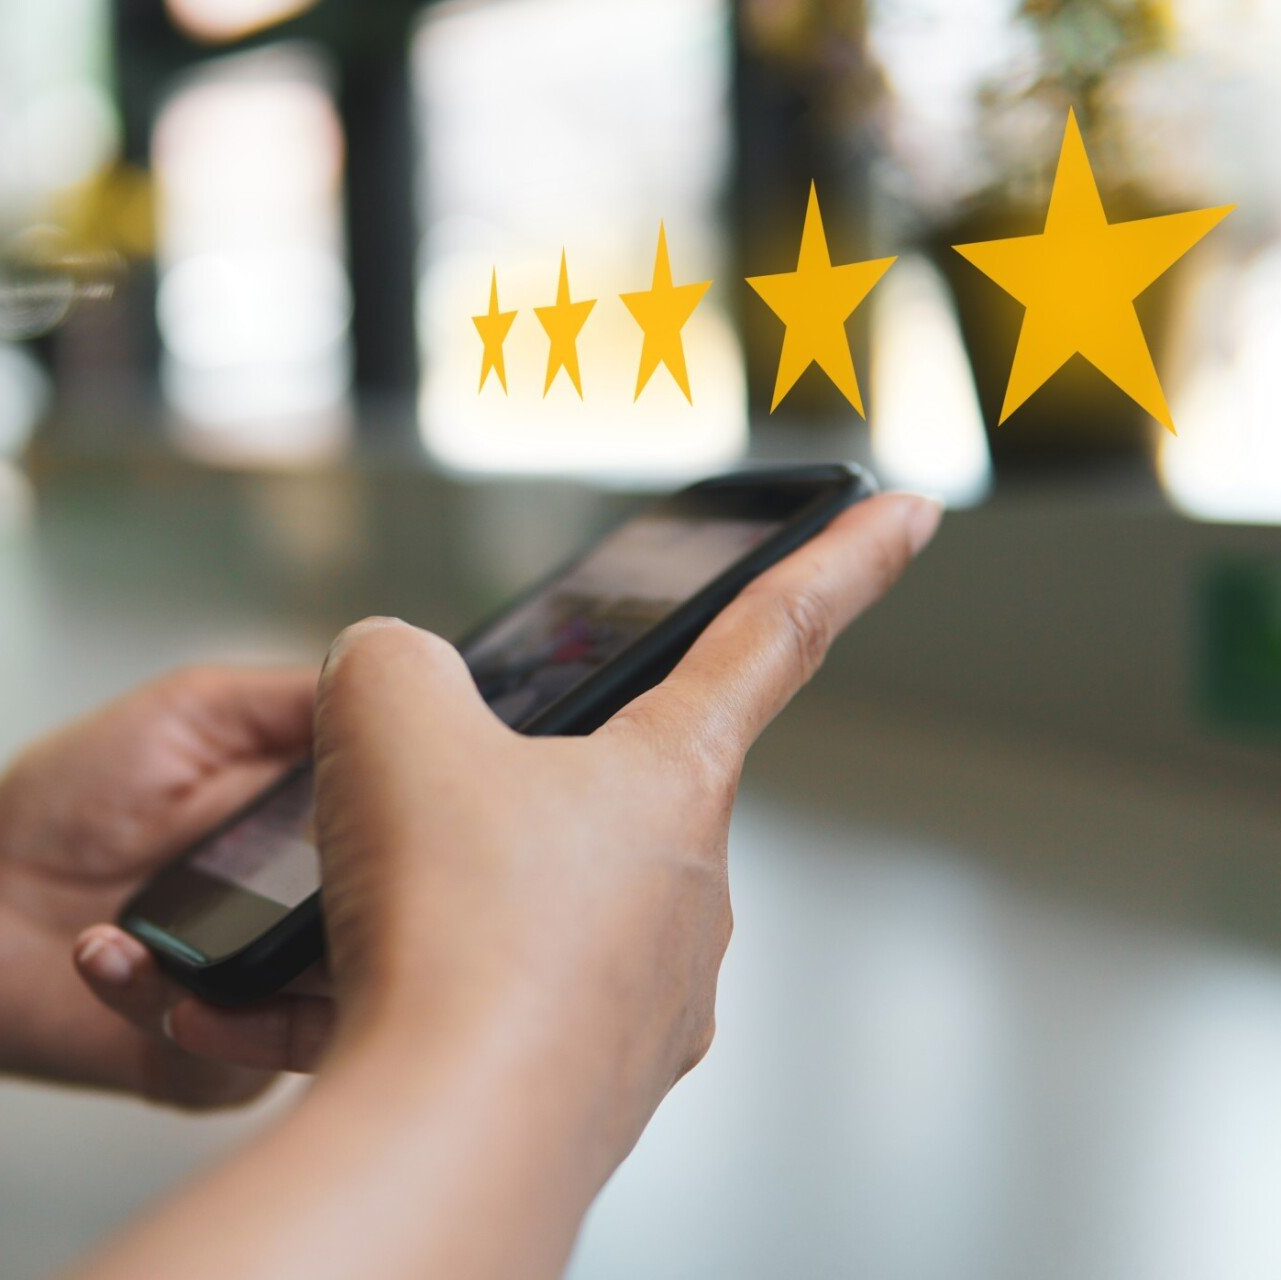 person on smartphone with image of five yellow stars overtop